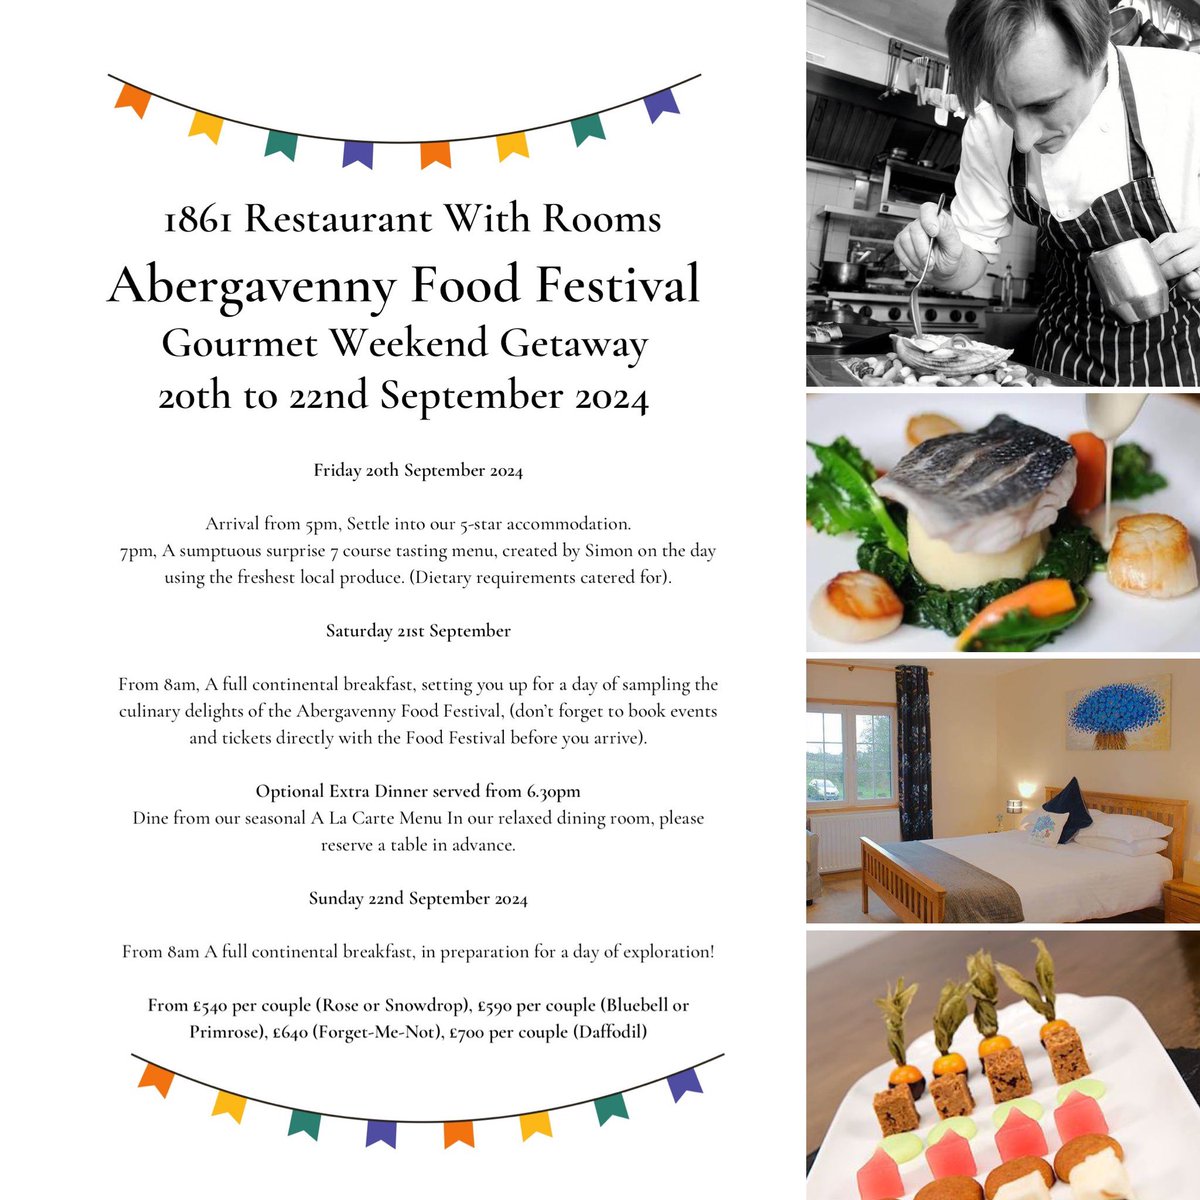 Join us for a gourmet getaway for the Abergavenny Food Festival in September 🍽️ 

* Stay in one of our 5-star rooms in the tranquil countryside
* Enjoy a sumptuous, surprise 7-course tasting menu on food festival eve
* Explore one of the UK’s best food festivals

1/2

#foodies